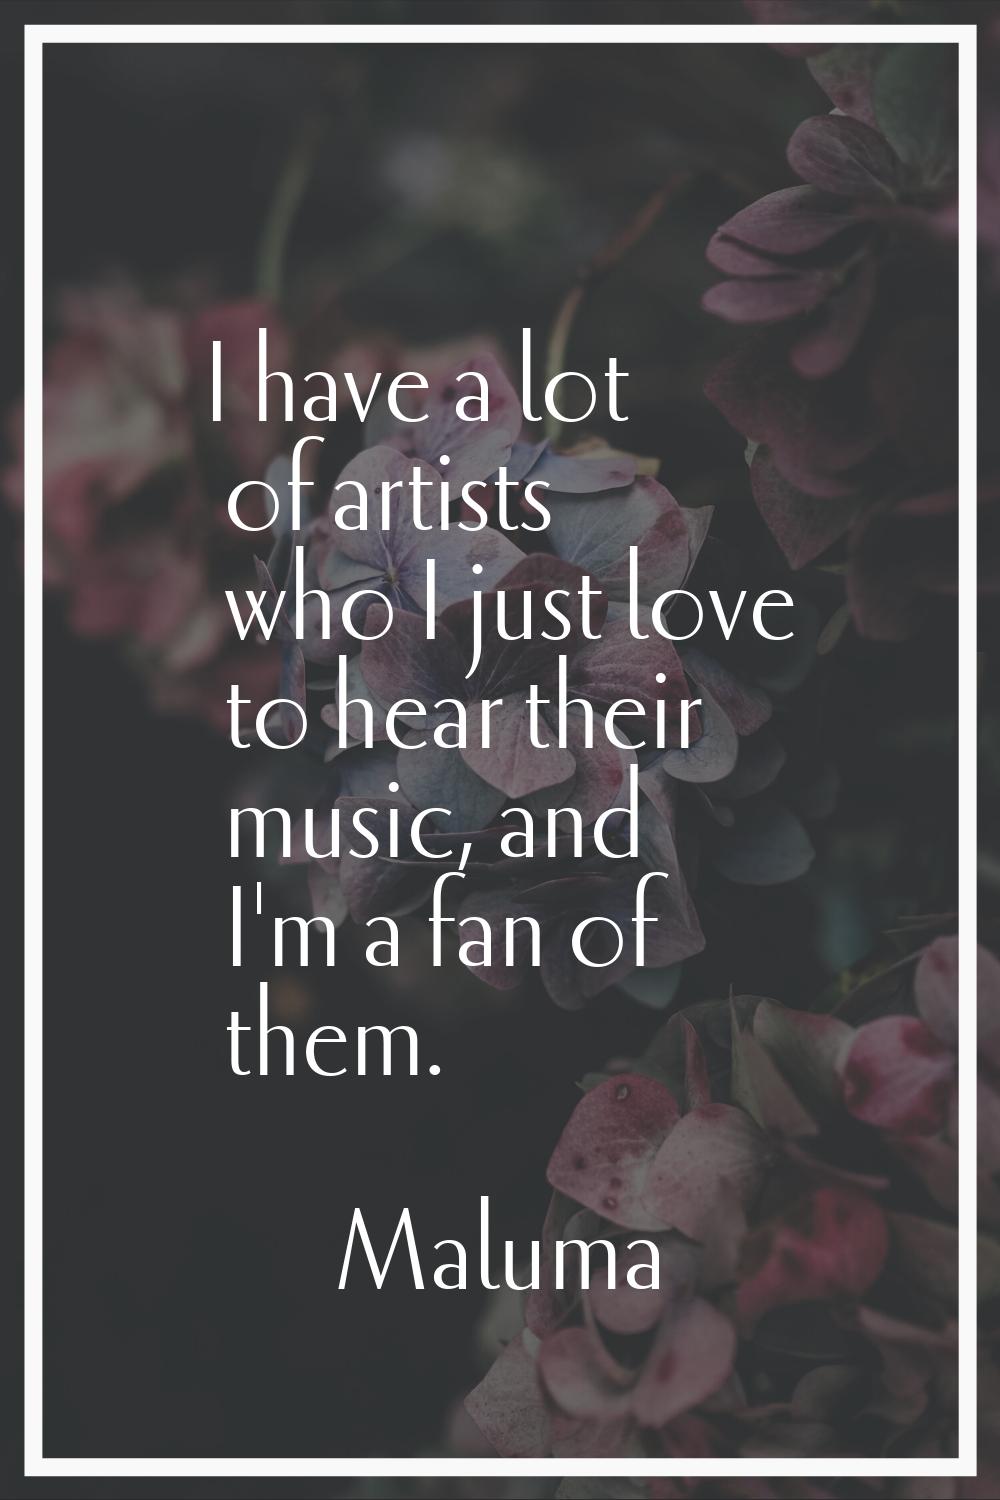 I have a lot of artists who I just love to hear their music, and I'm a fan of them.